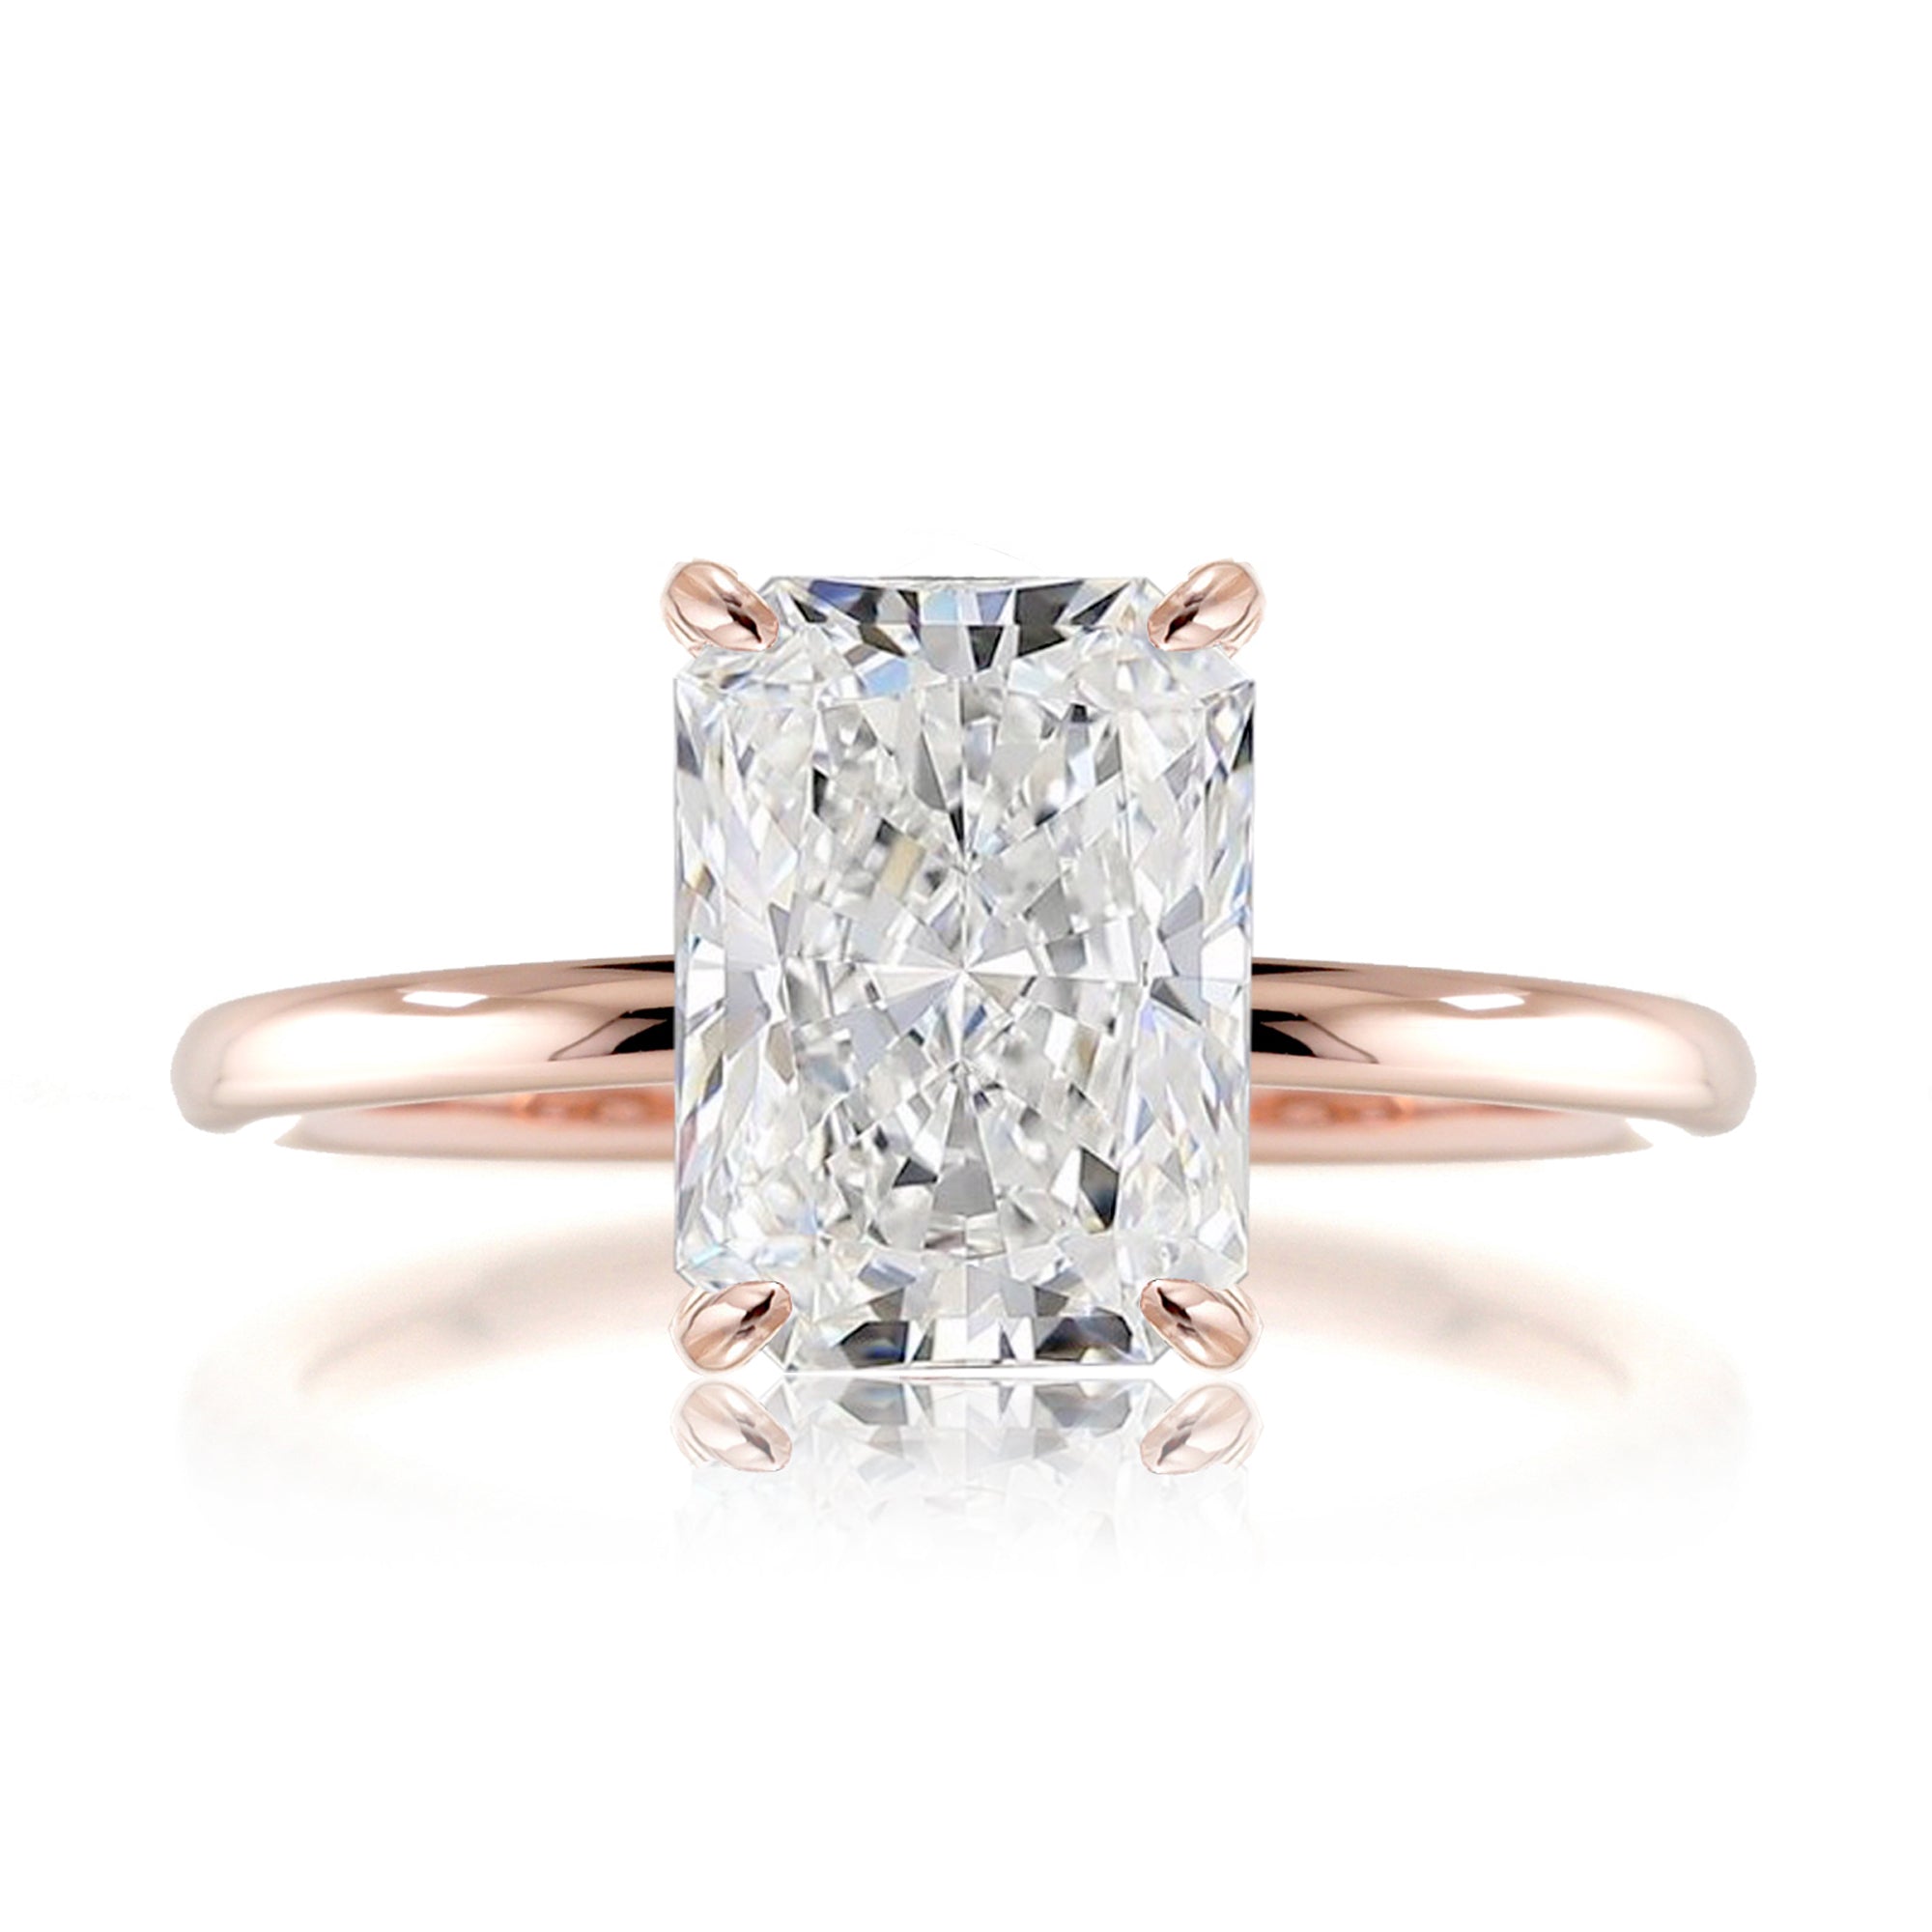 Radiant cut lab-grown diamond engagement ring rose gold - The Ava solid band